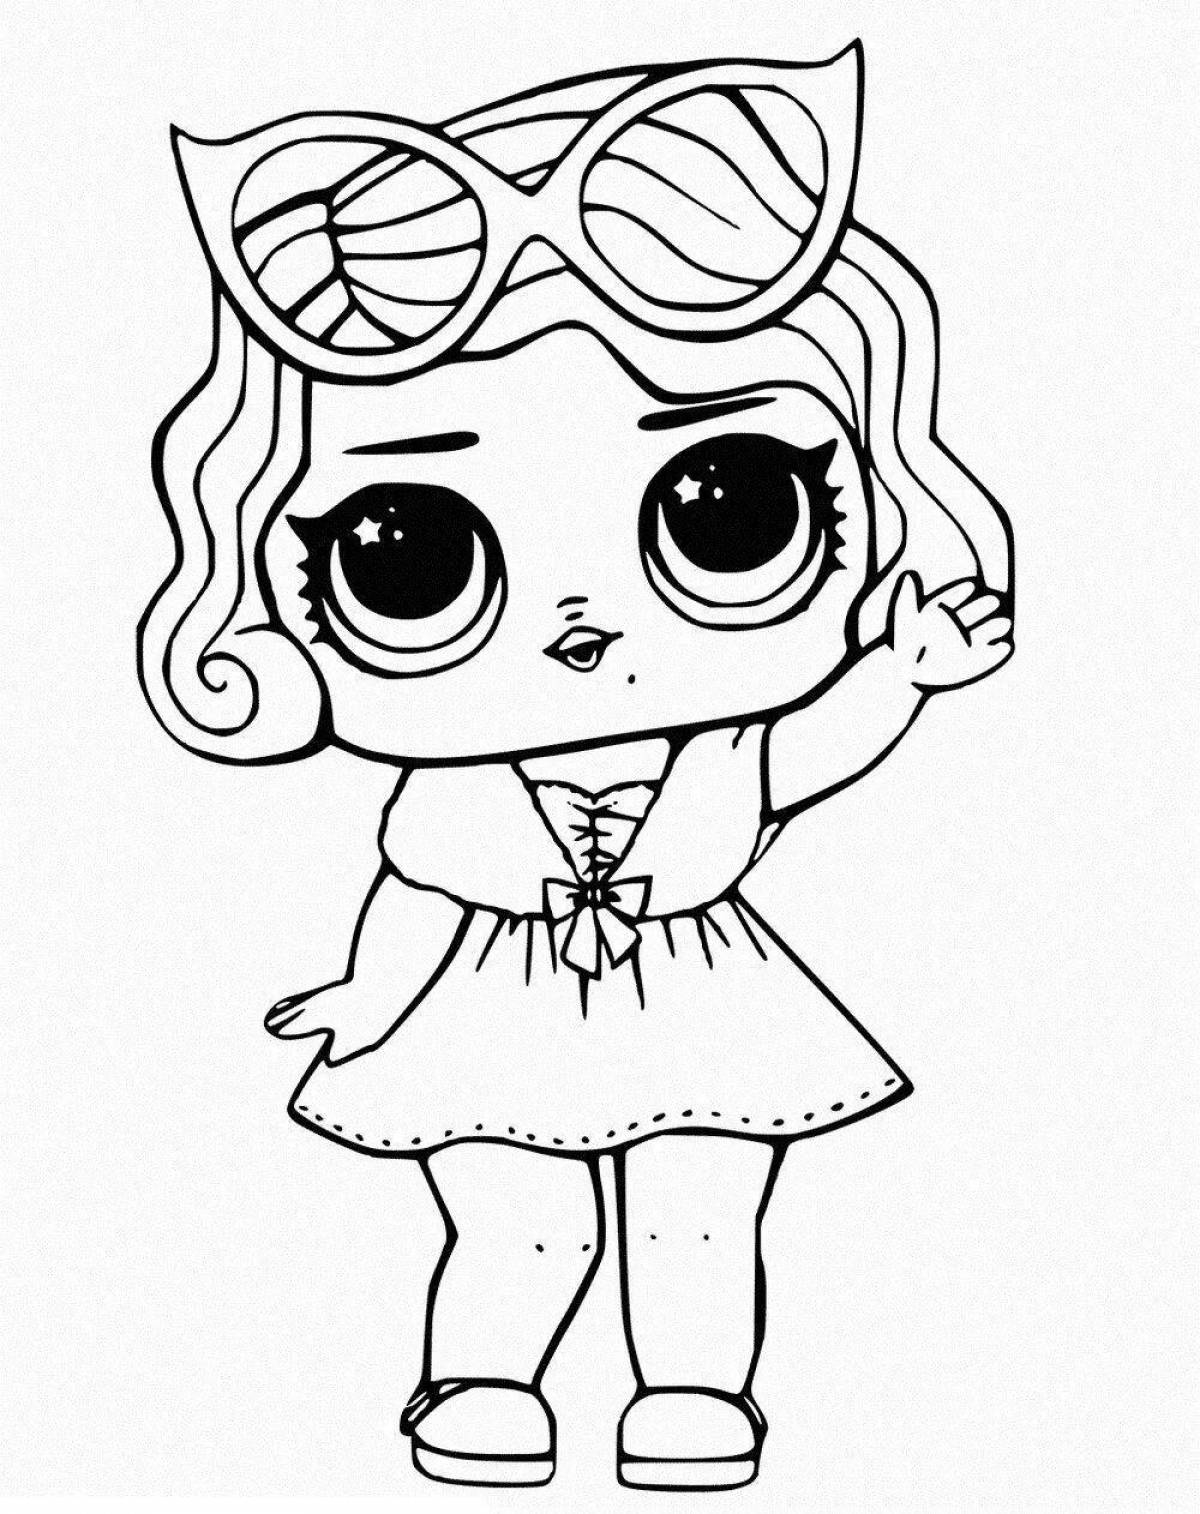 Fancy coloring doll for 6-7 year olds